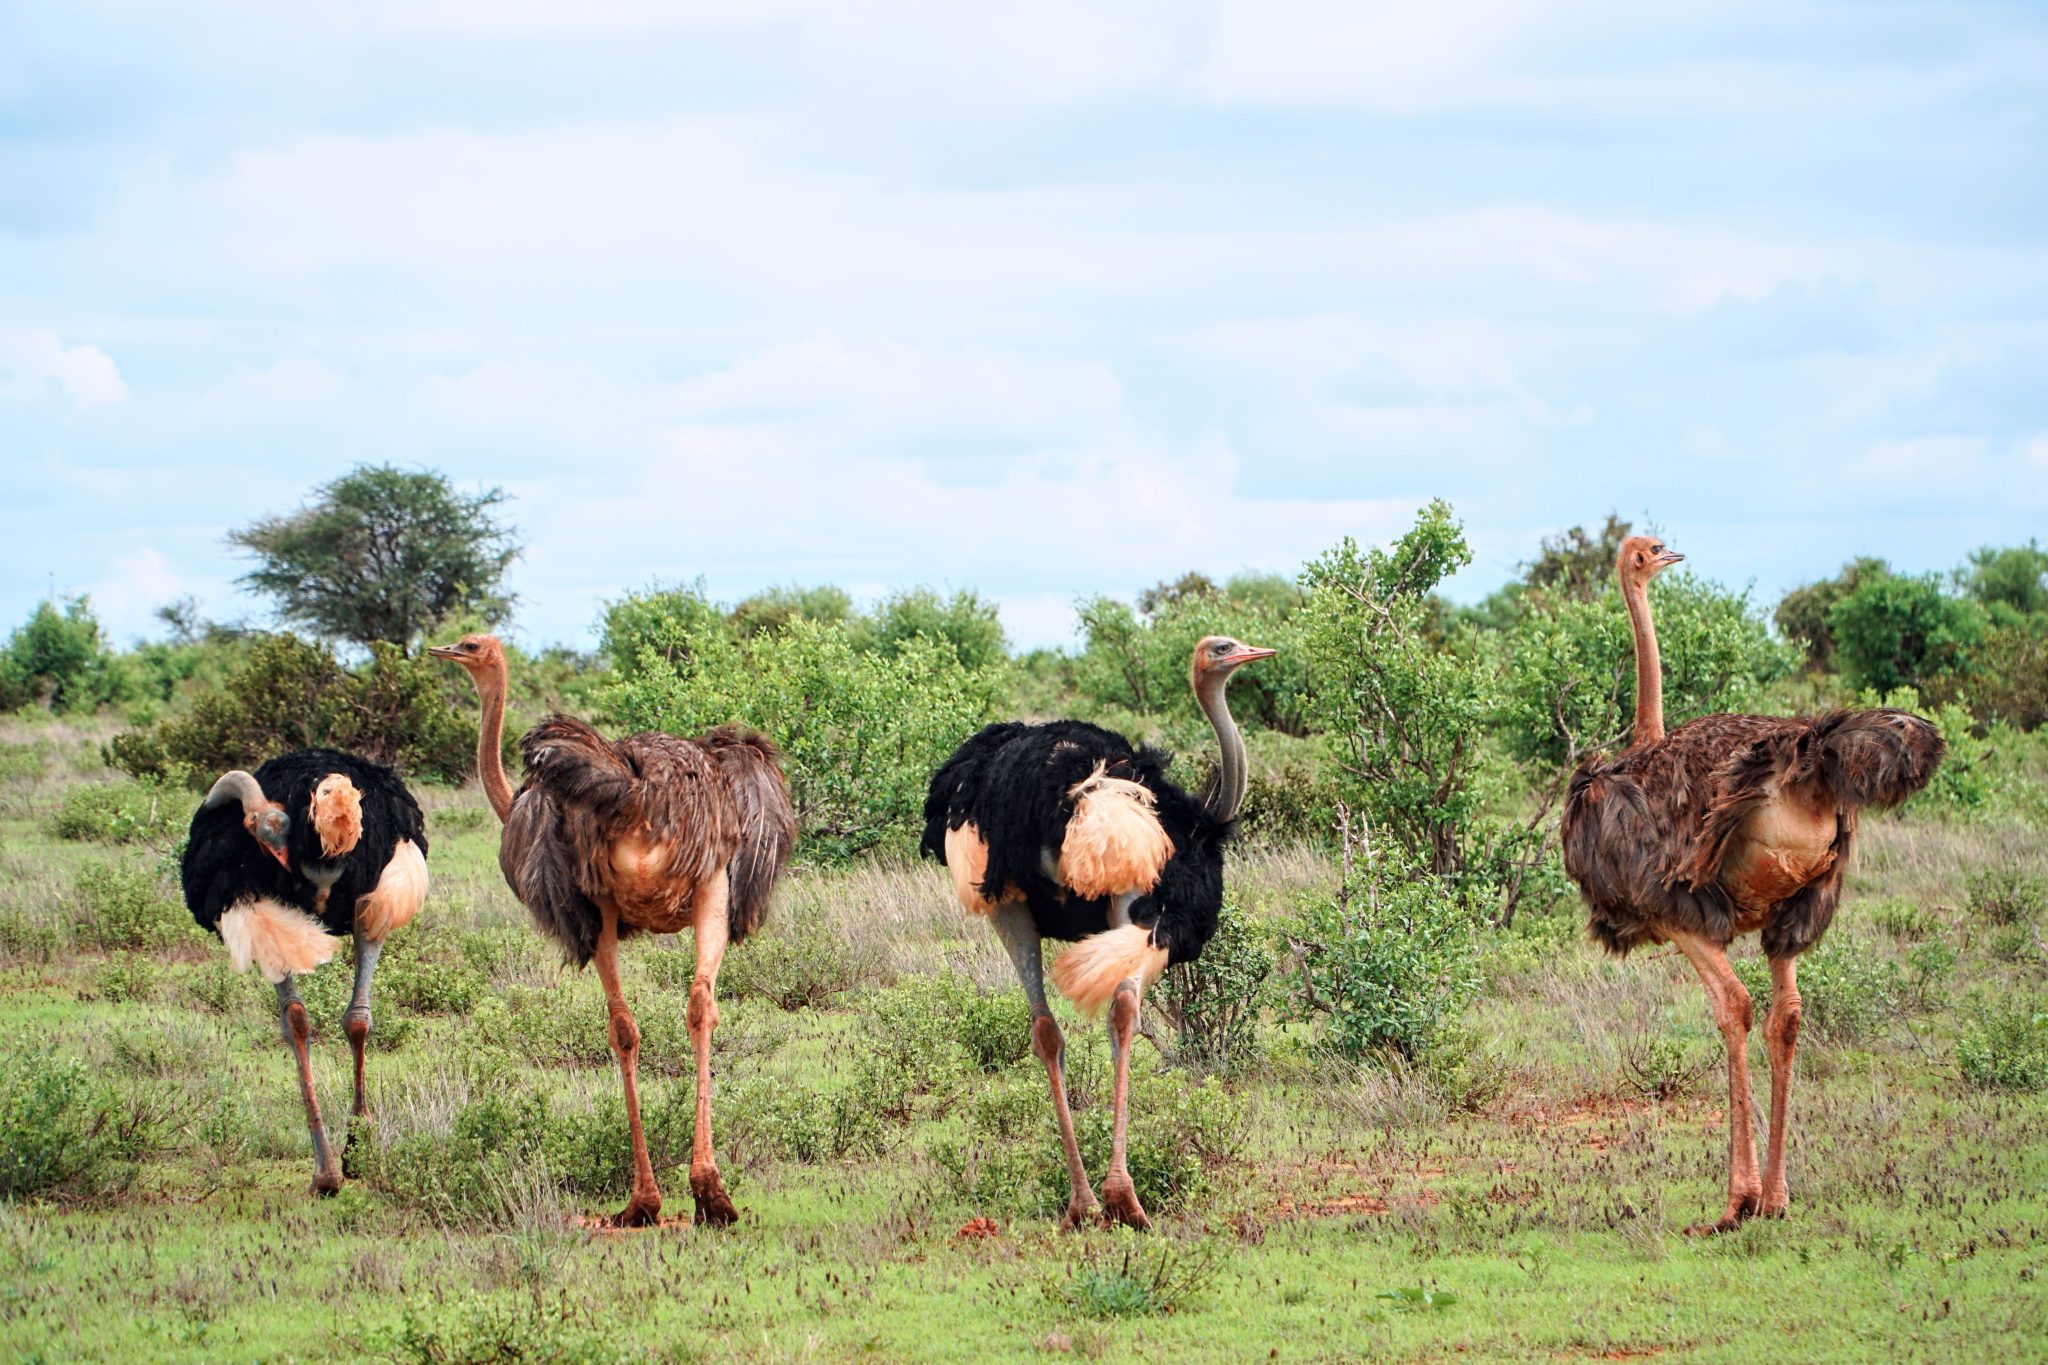 Four ostriches in Africa